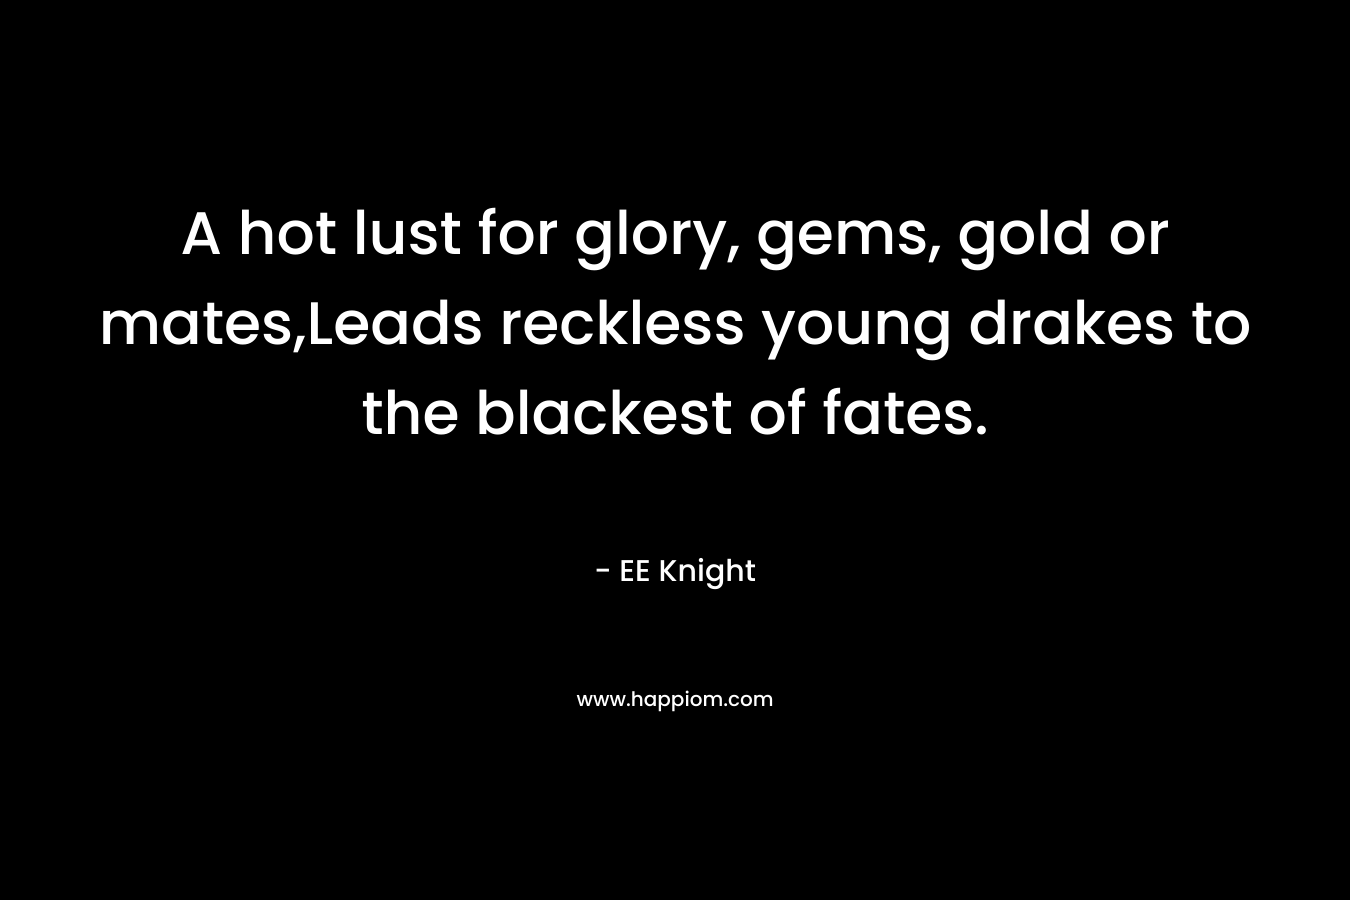 A hot lust for glory, gems, gold or mates,Leads reckless young drakes to the blackest of fates. – EE Knight